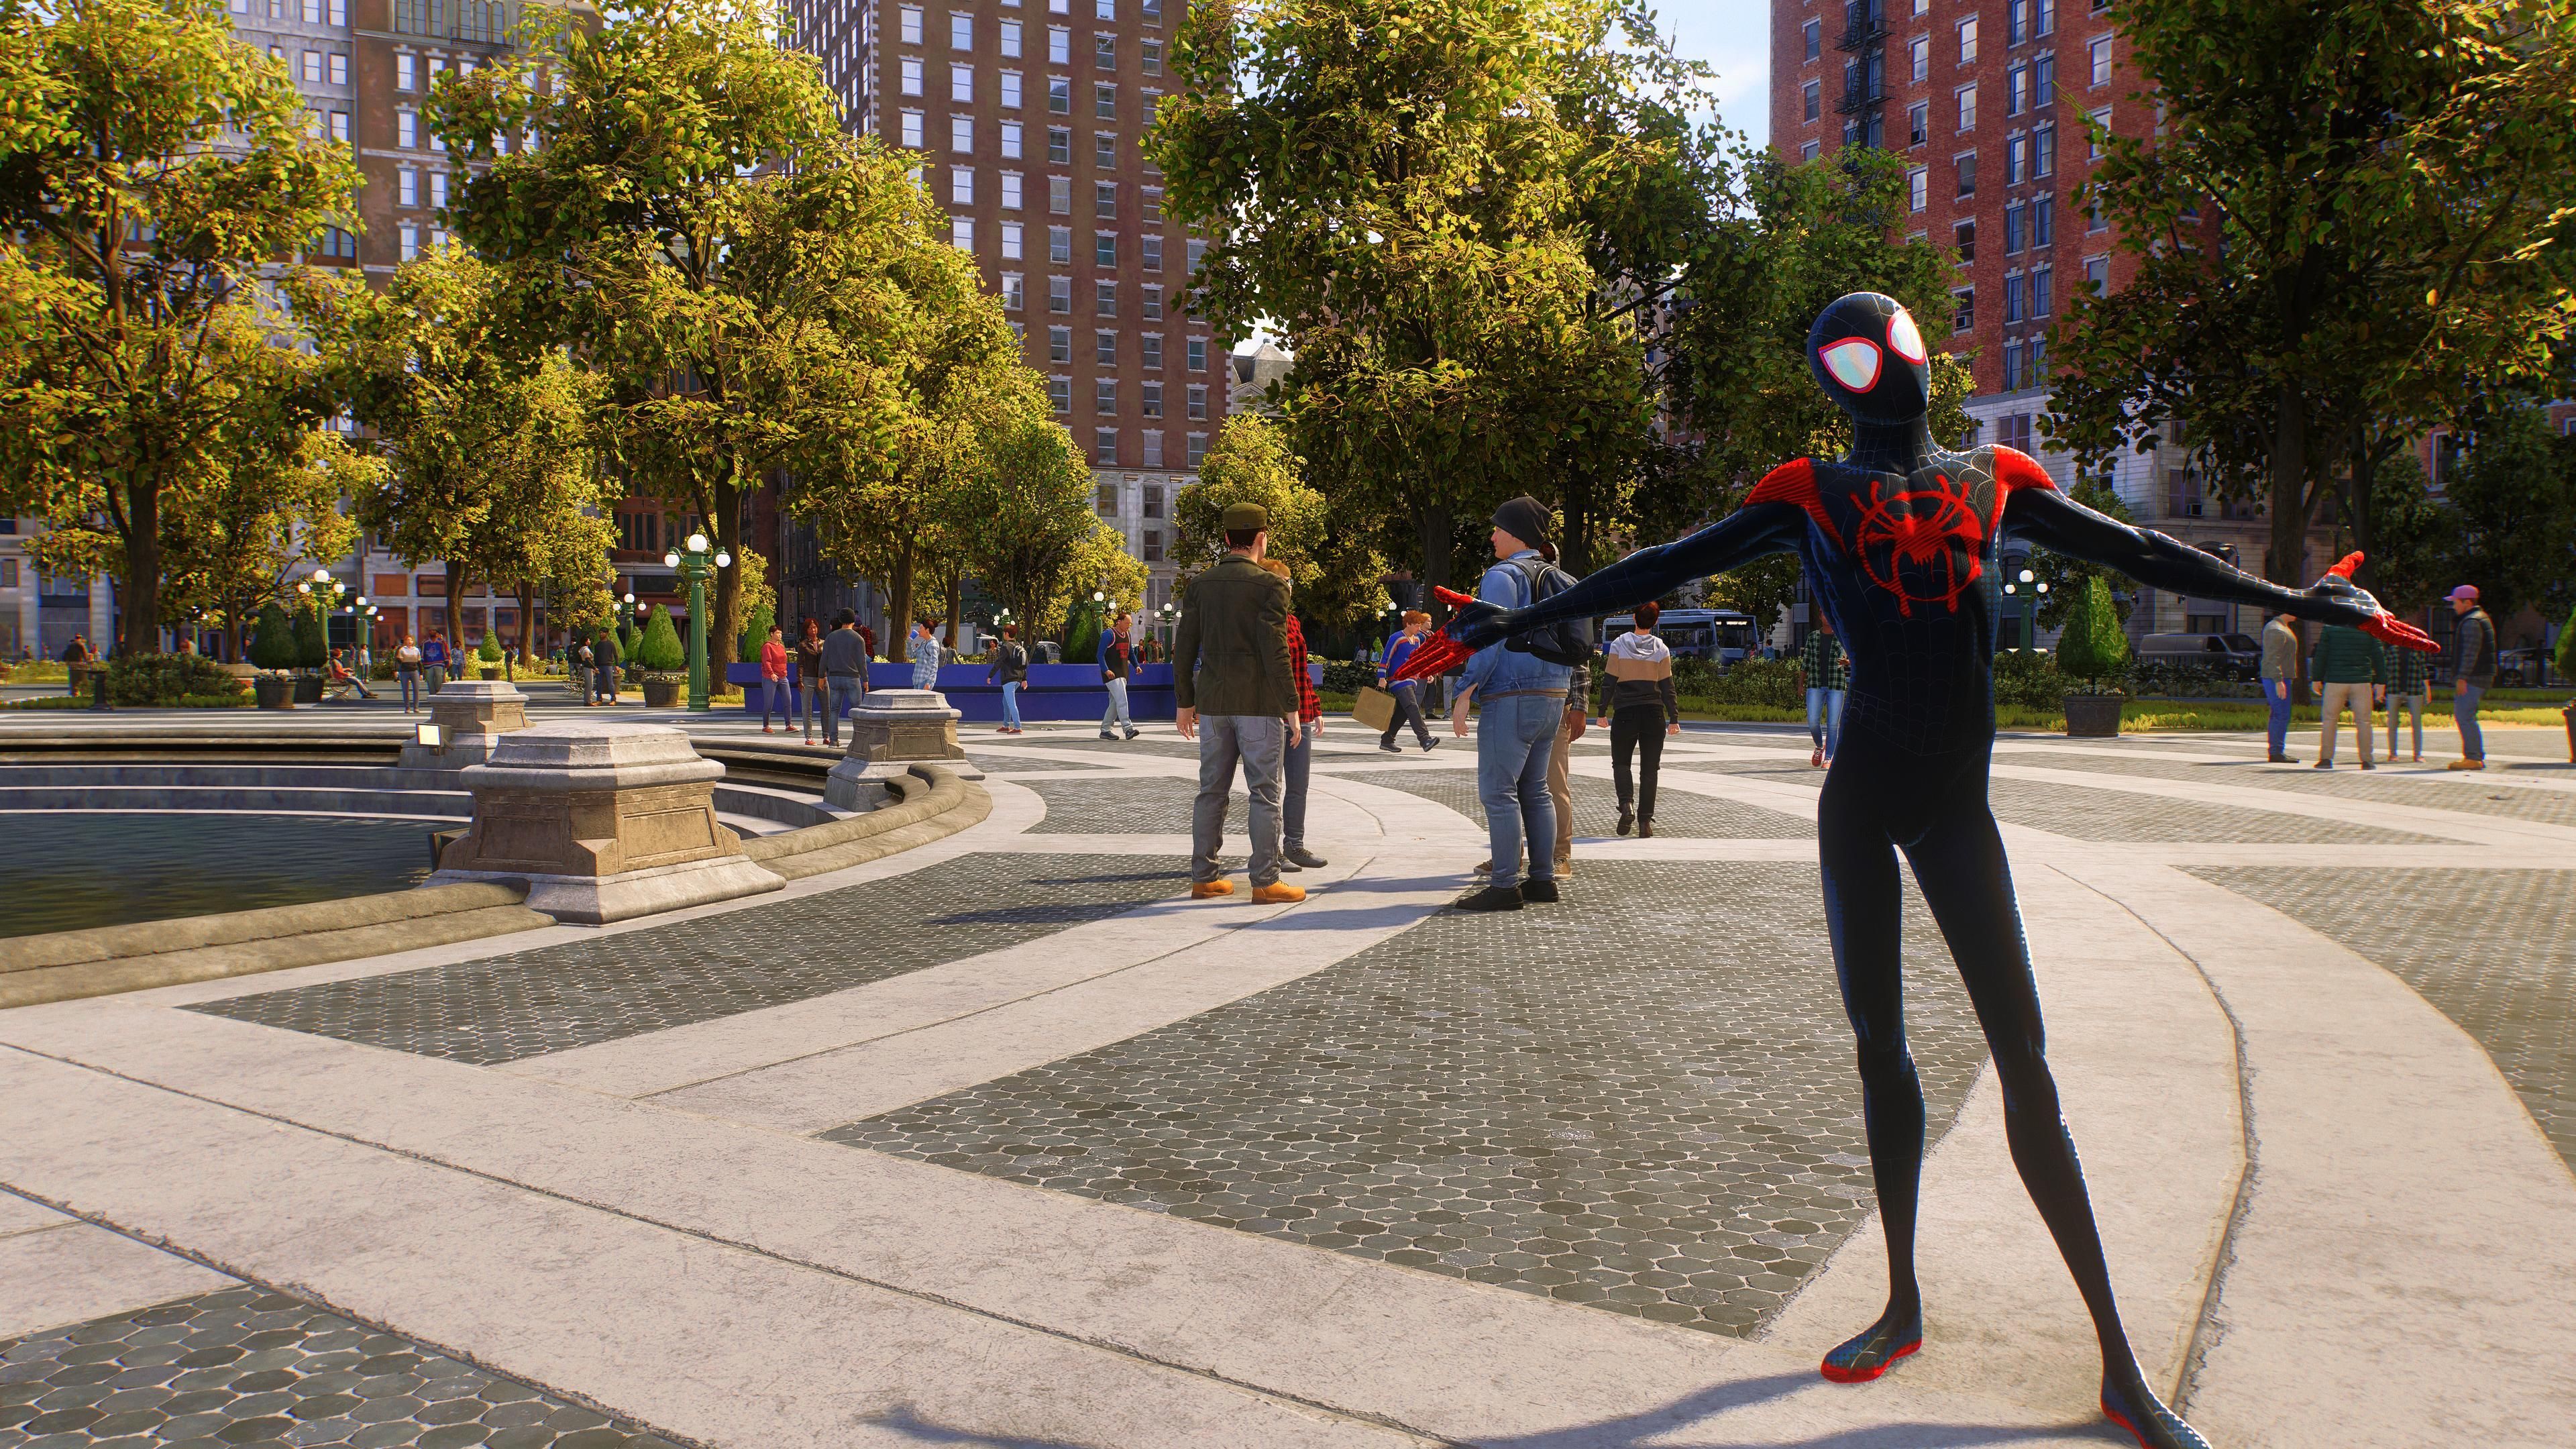 Hanging out in Spider-Man 2 near a park in Brooklyn